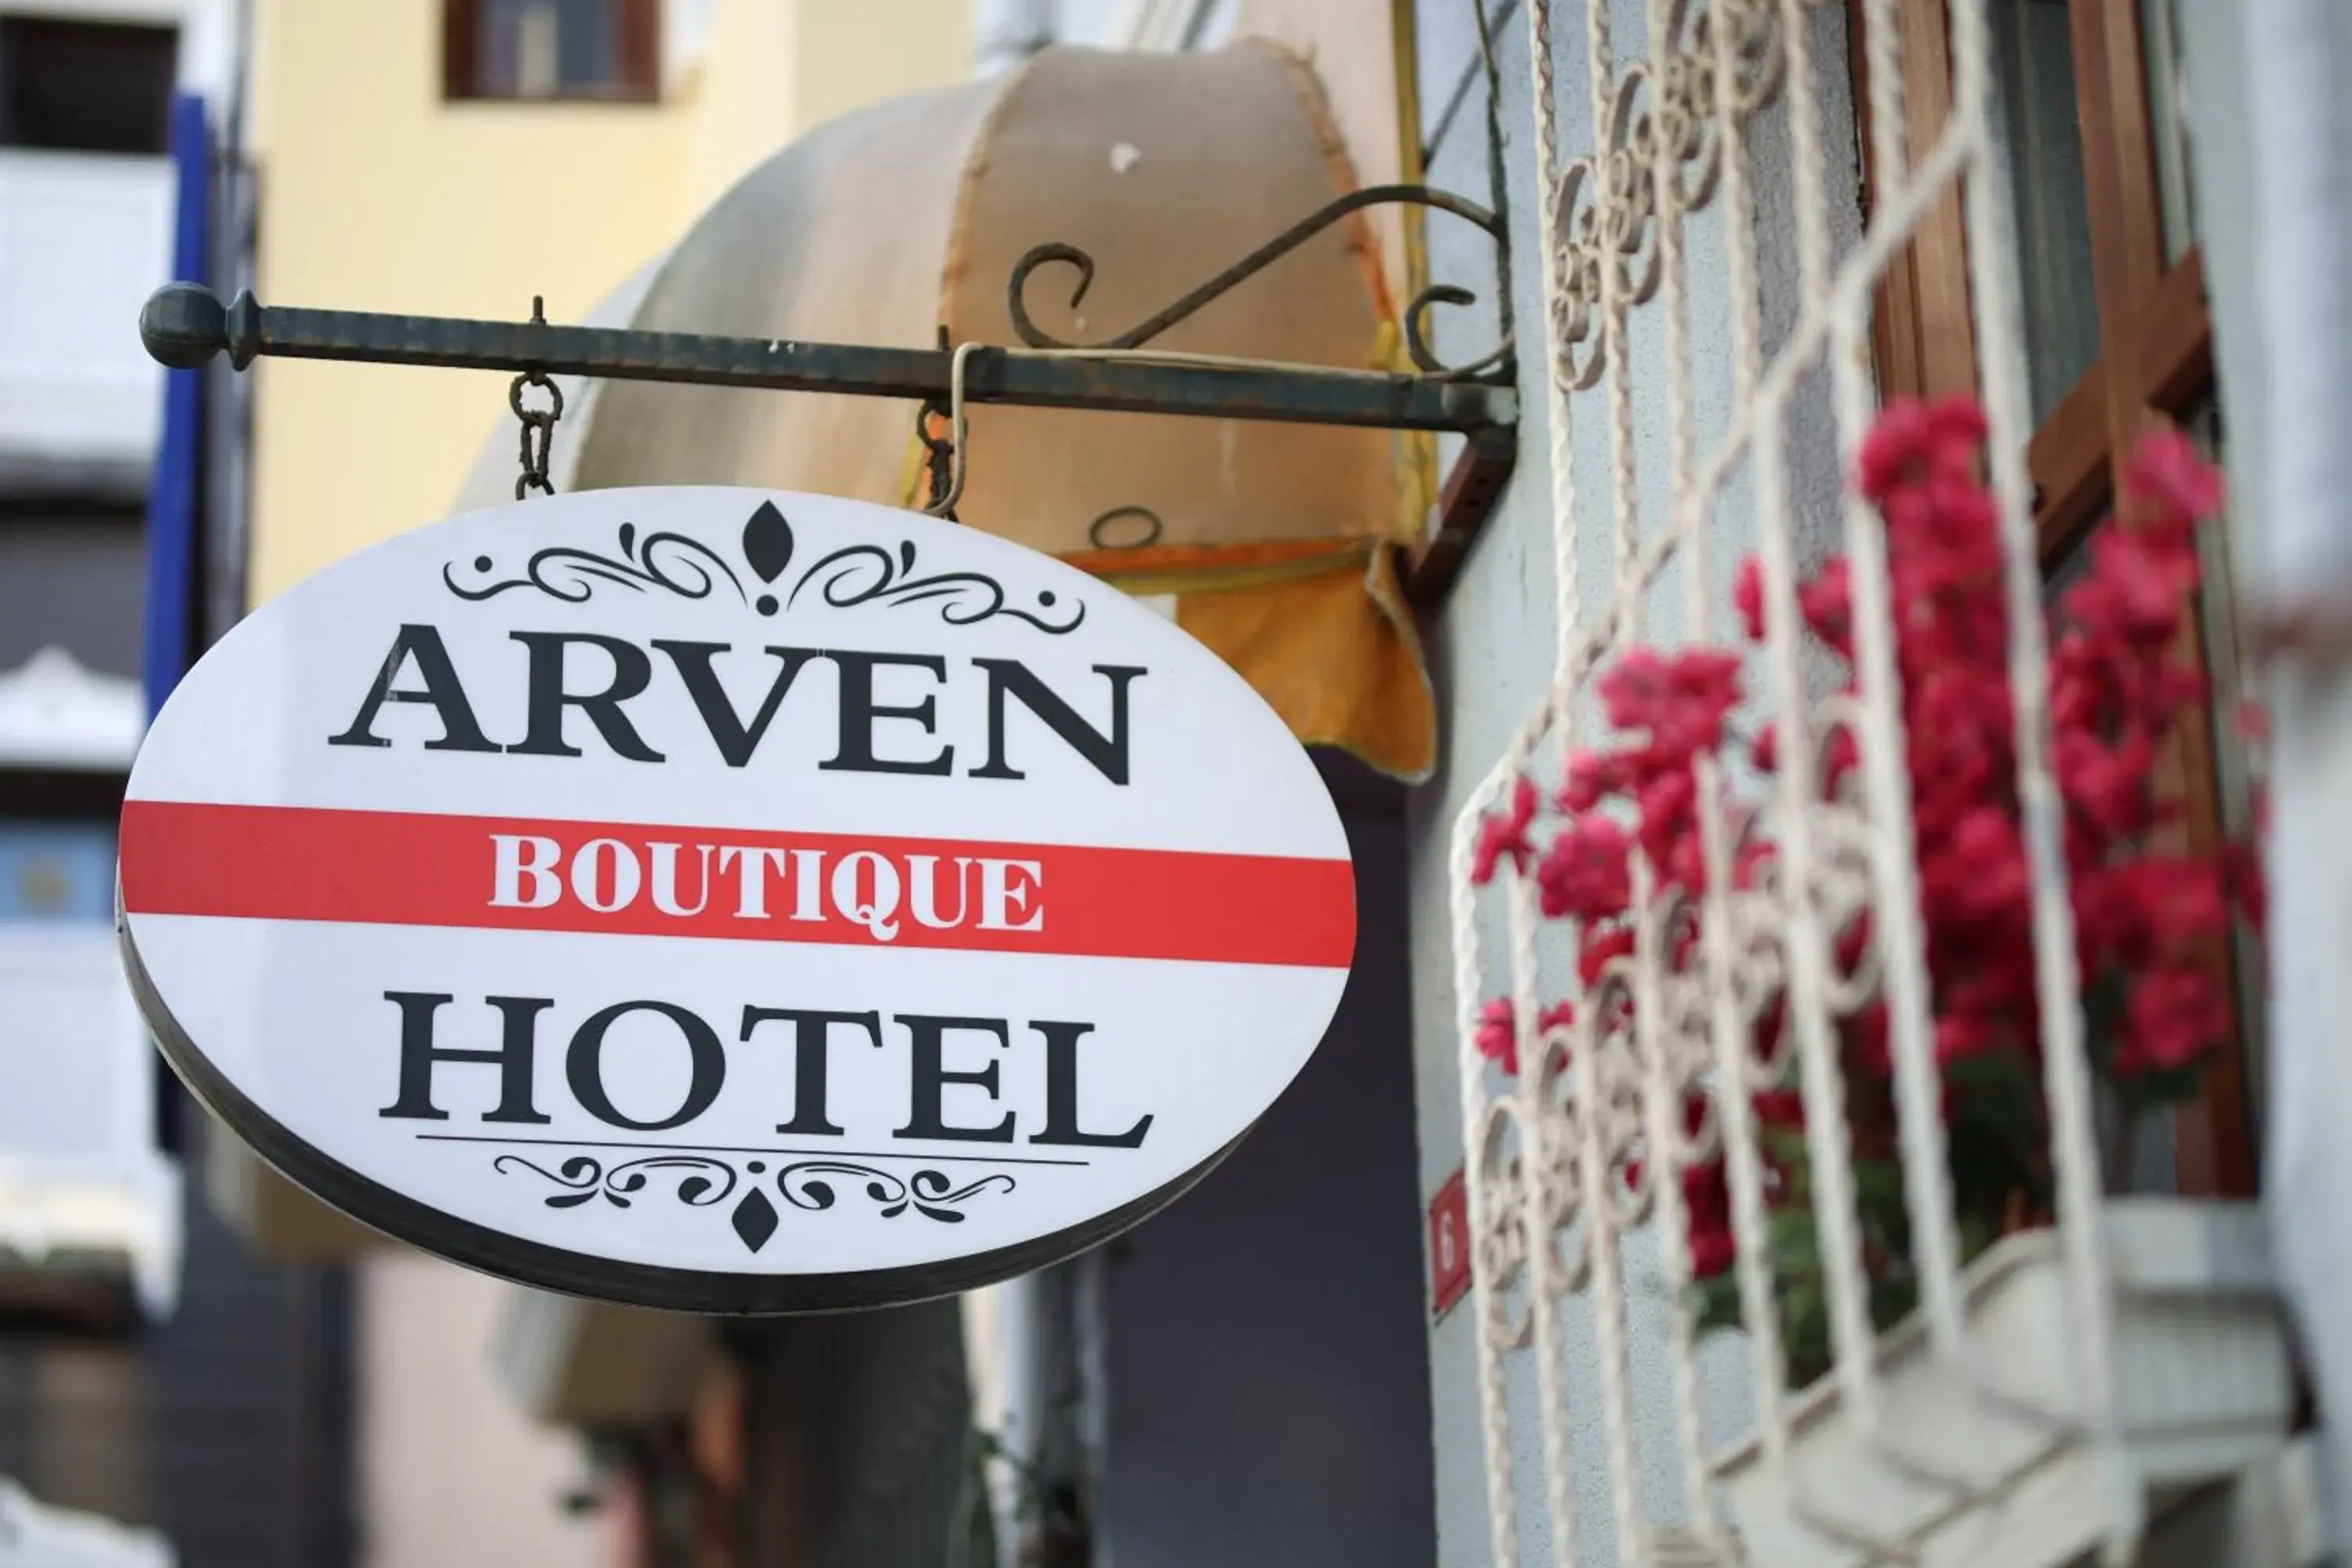 Property building in Arven Boutique Hotel